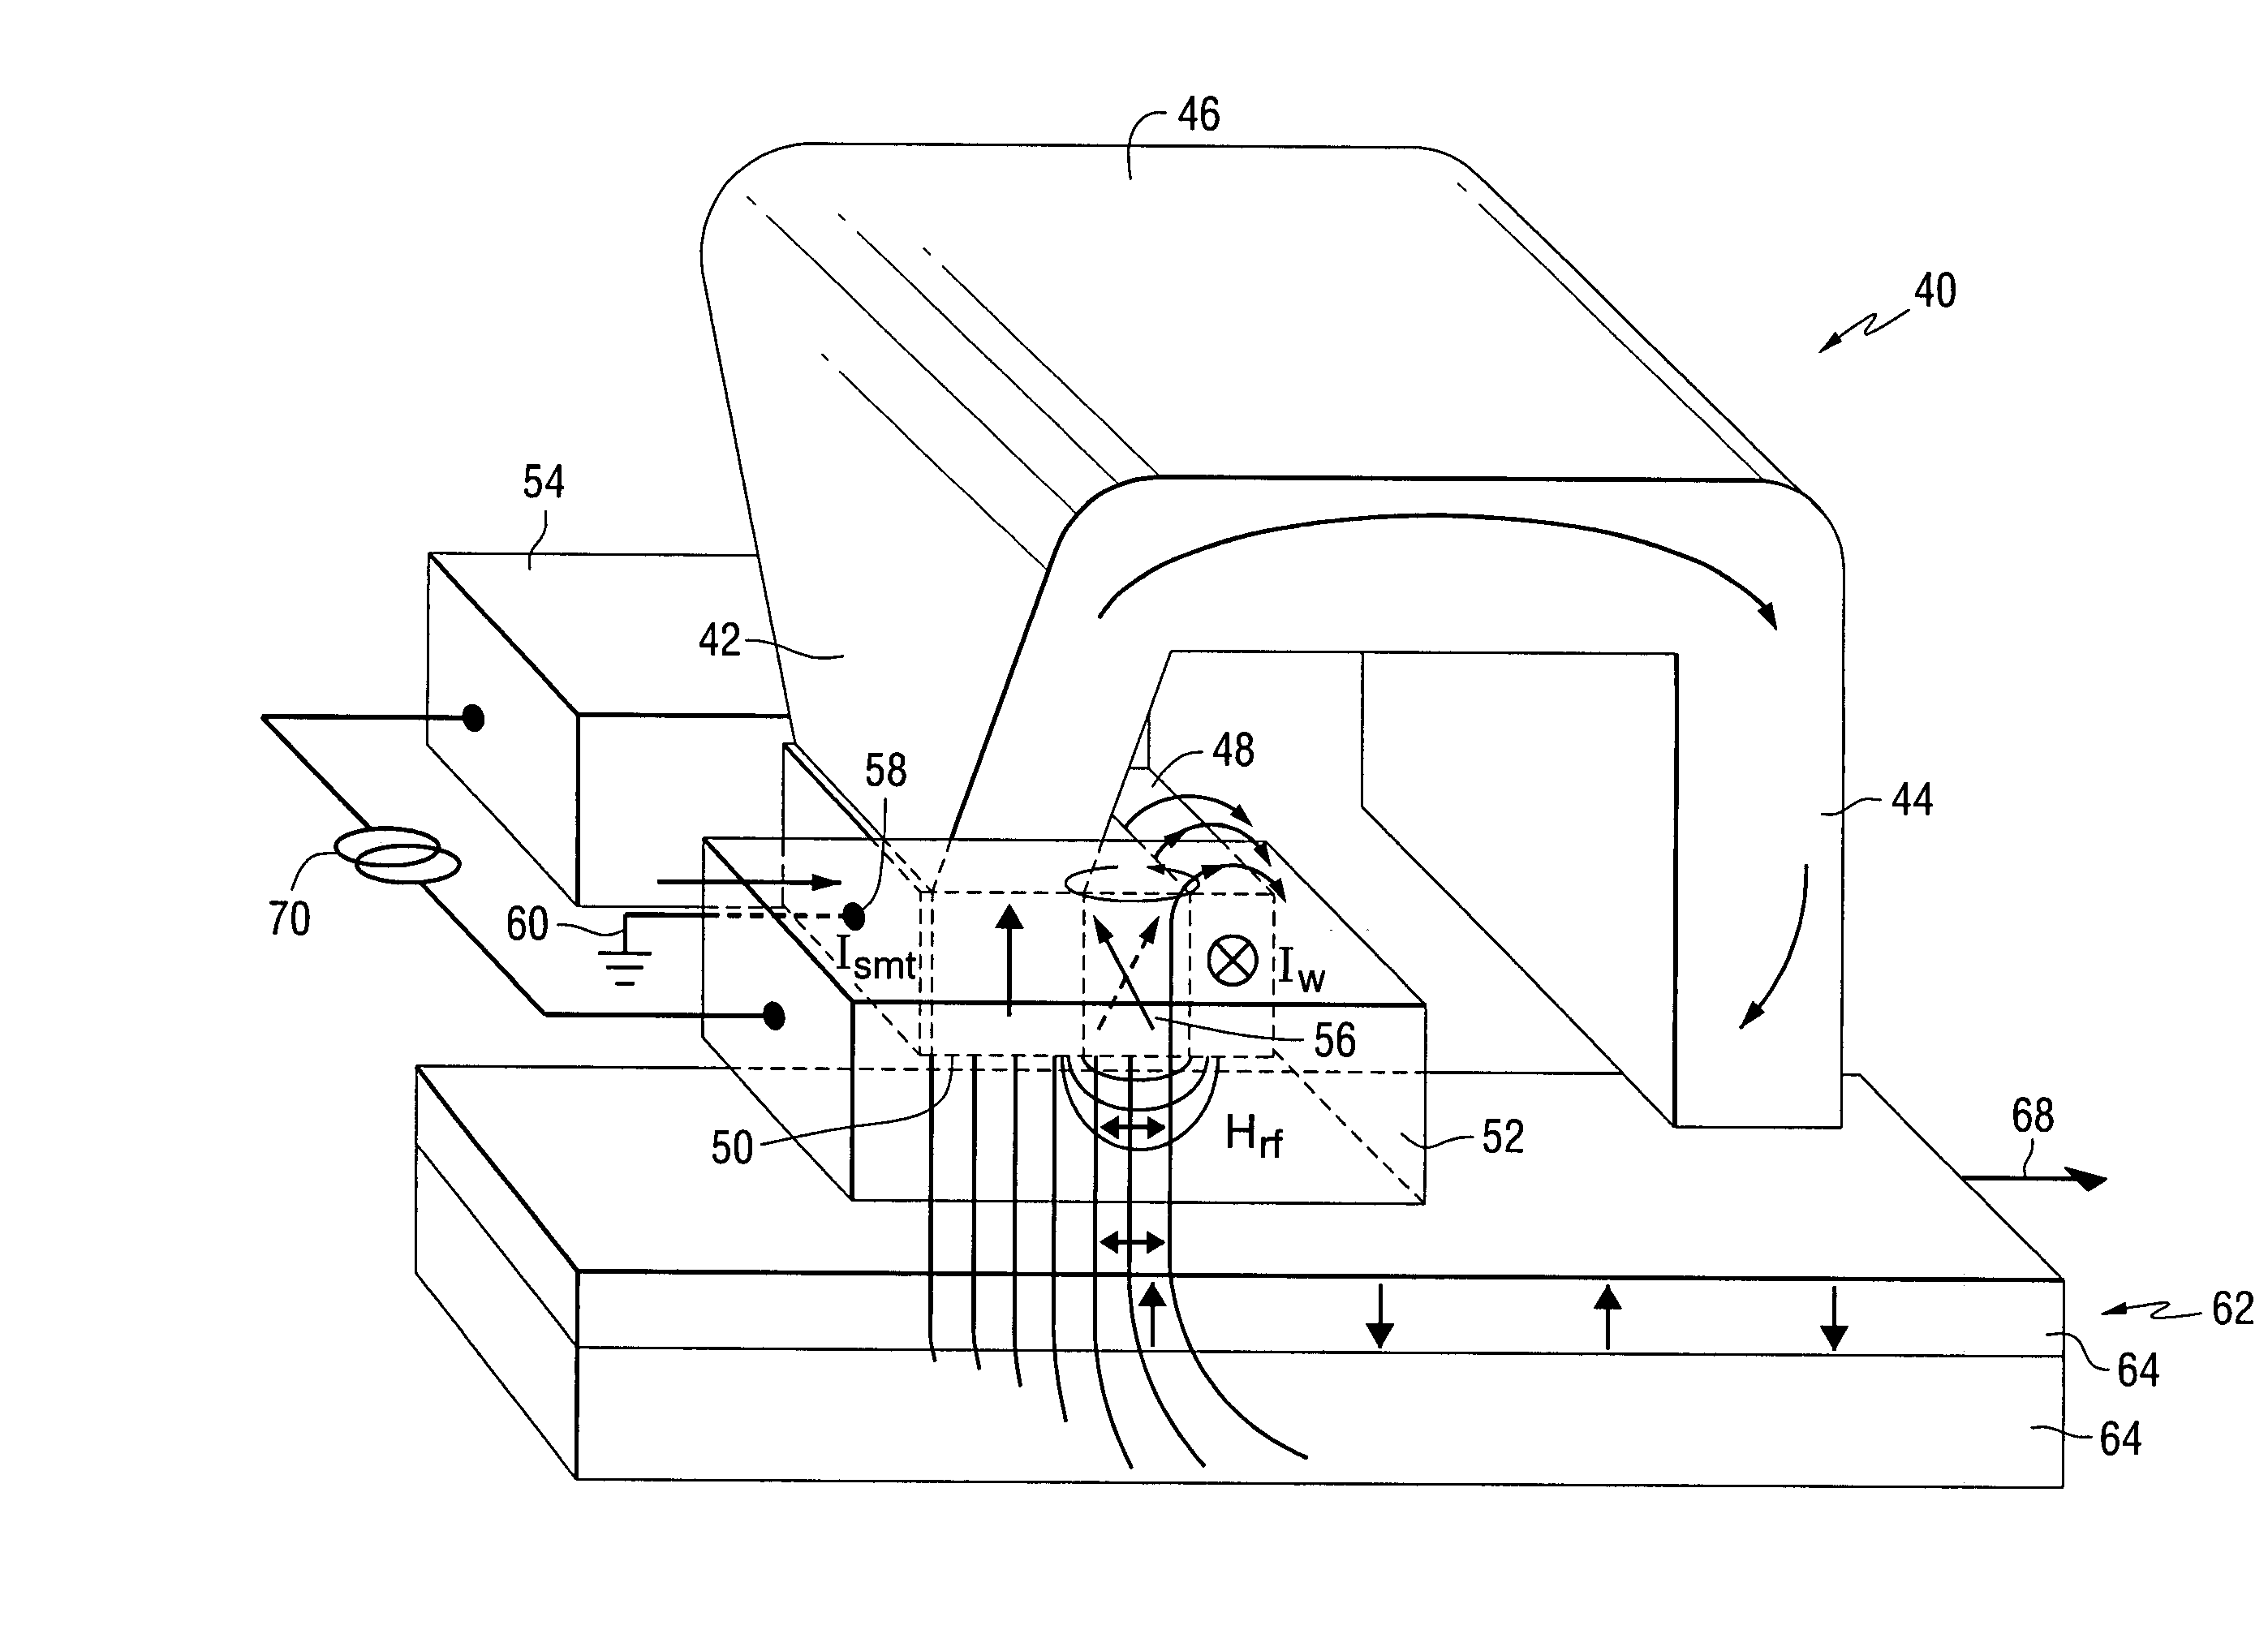 WAMR writer with an integrated spin momentum transfer driven oscillator for generating a microwave assist field